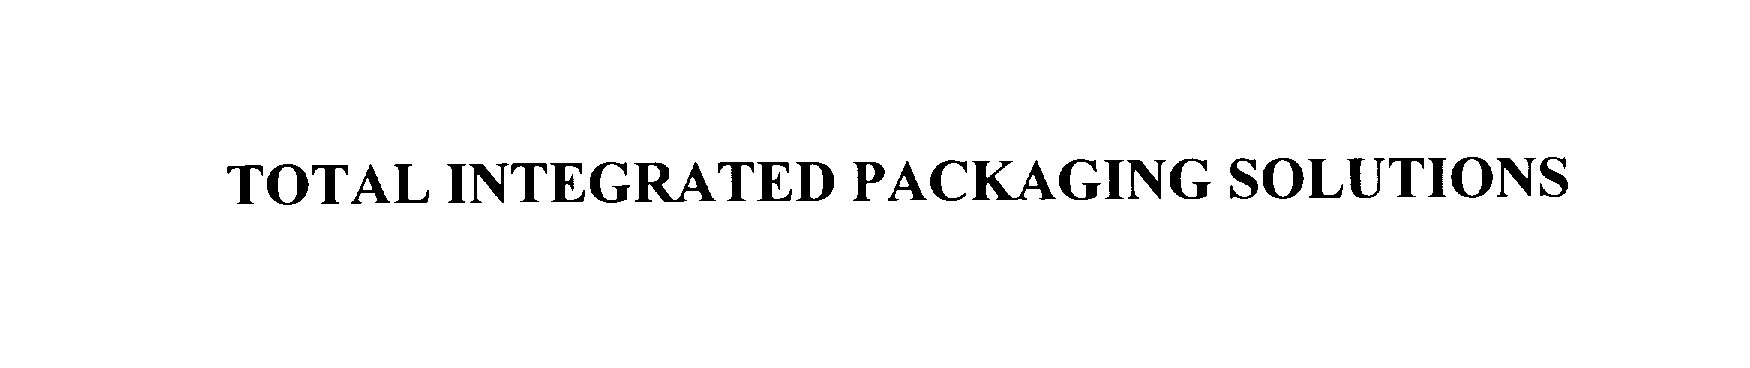  TOTAL INTEGRATED PACKAGING SOLUTIONS